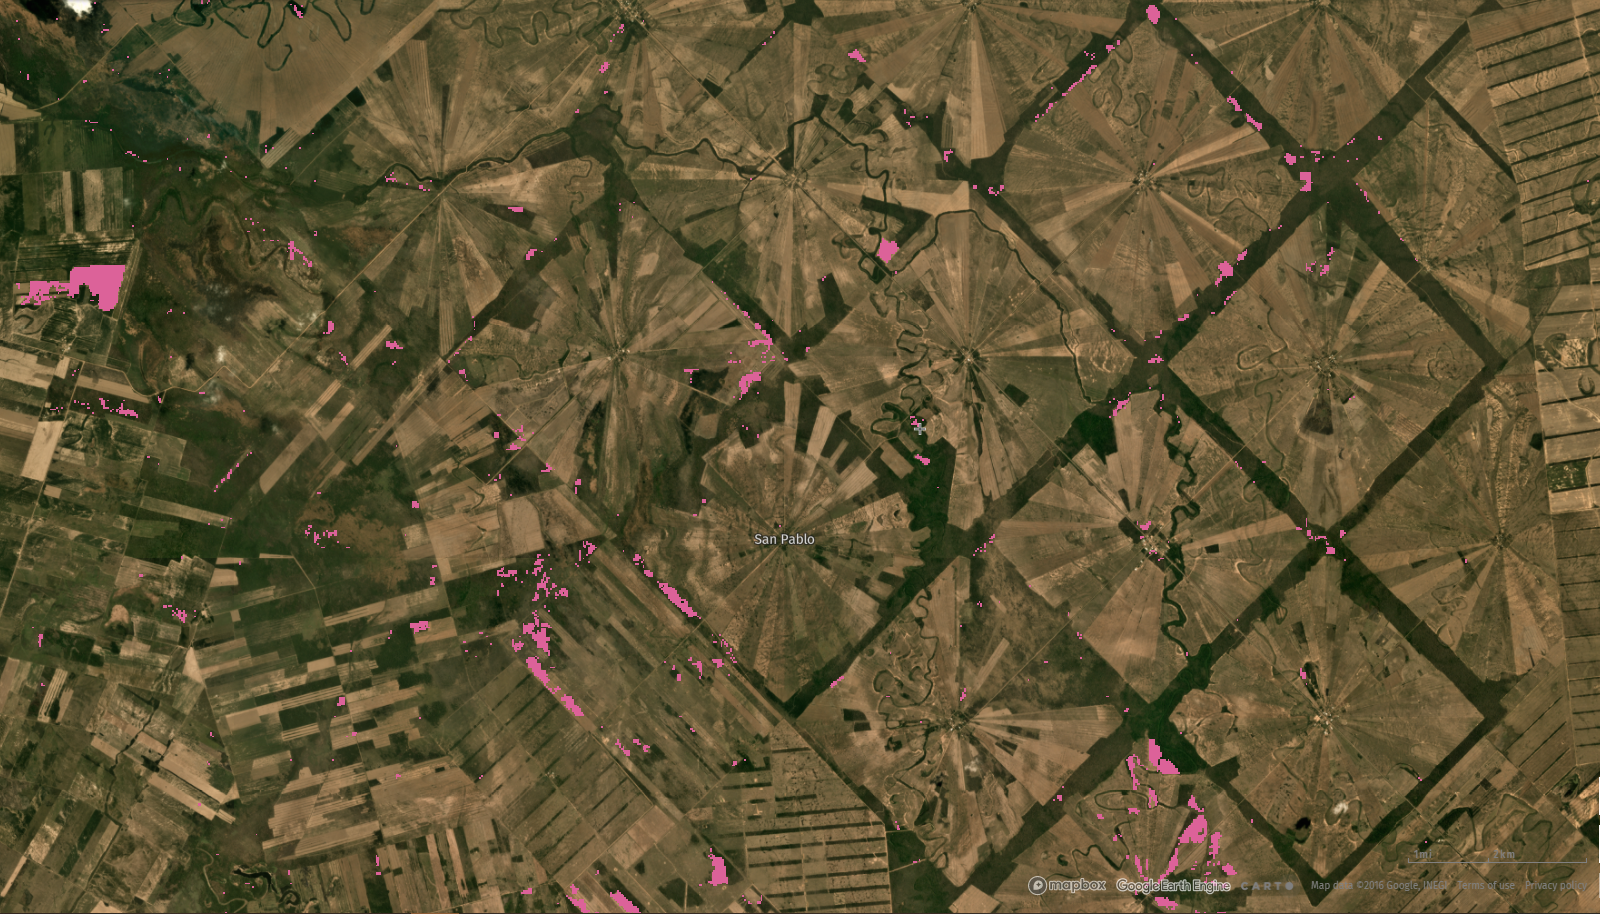 Radial agricultural settlement in Bolivia visible in high-resolution Imagery.